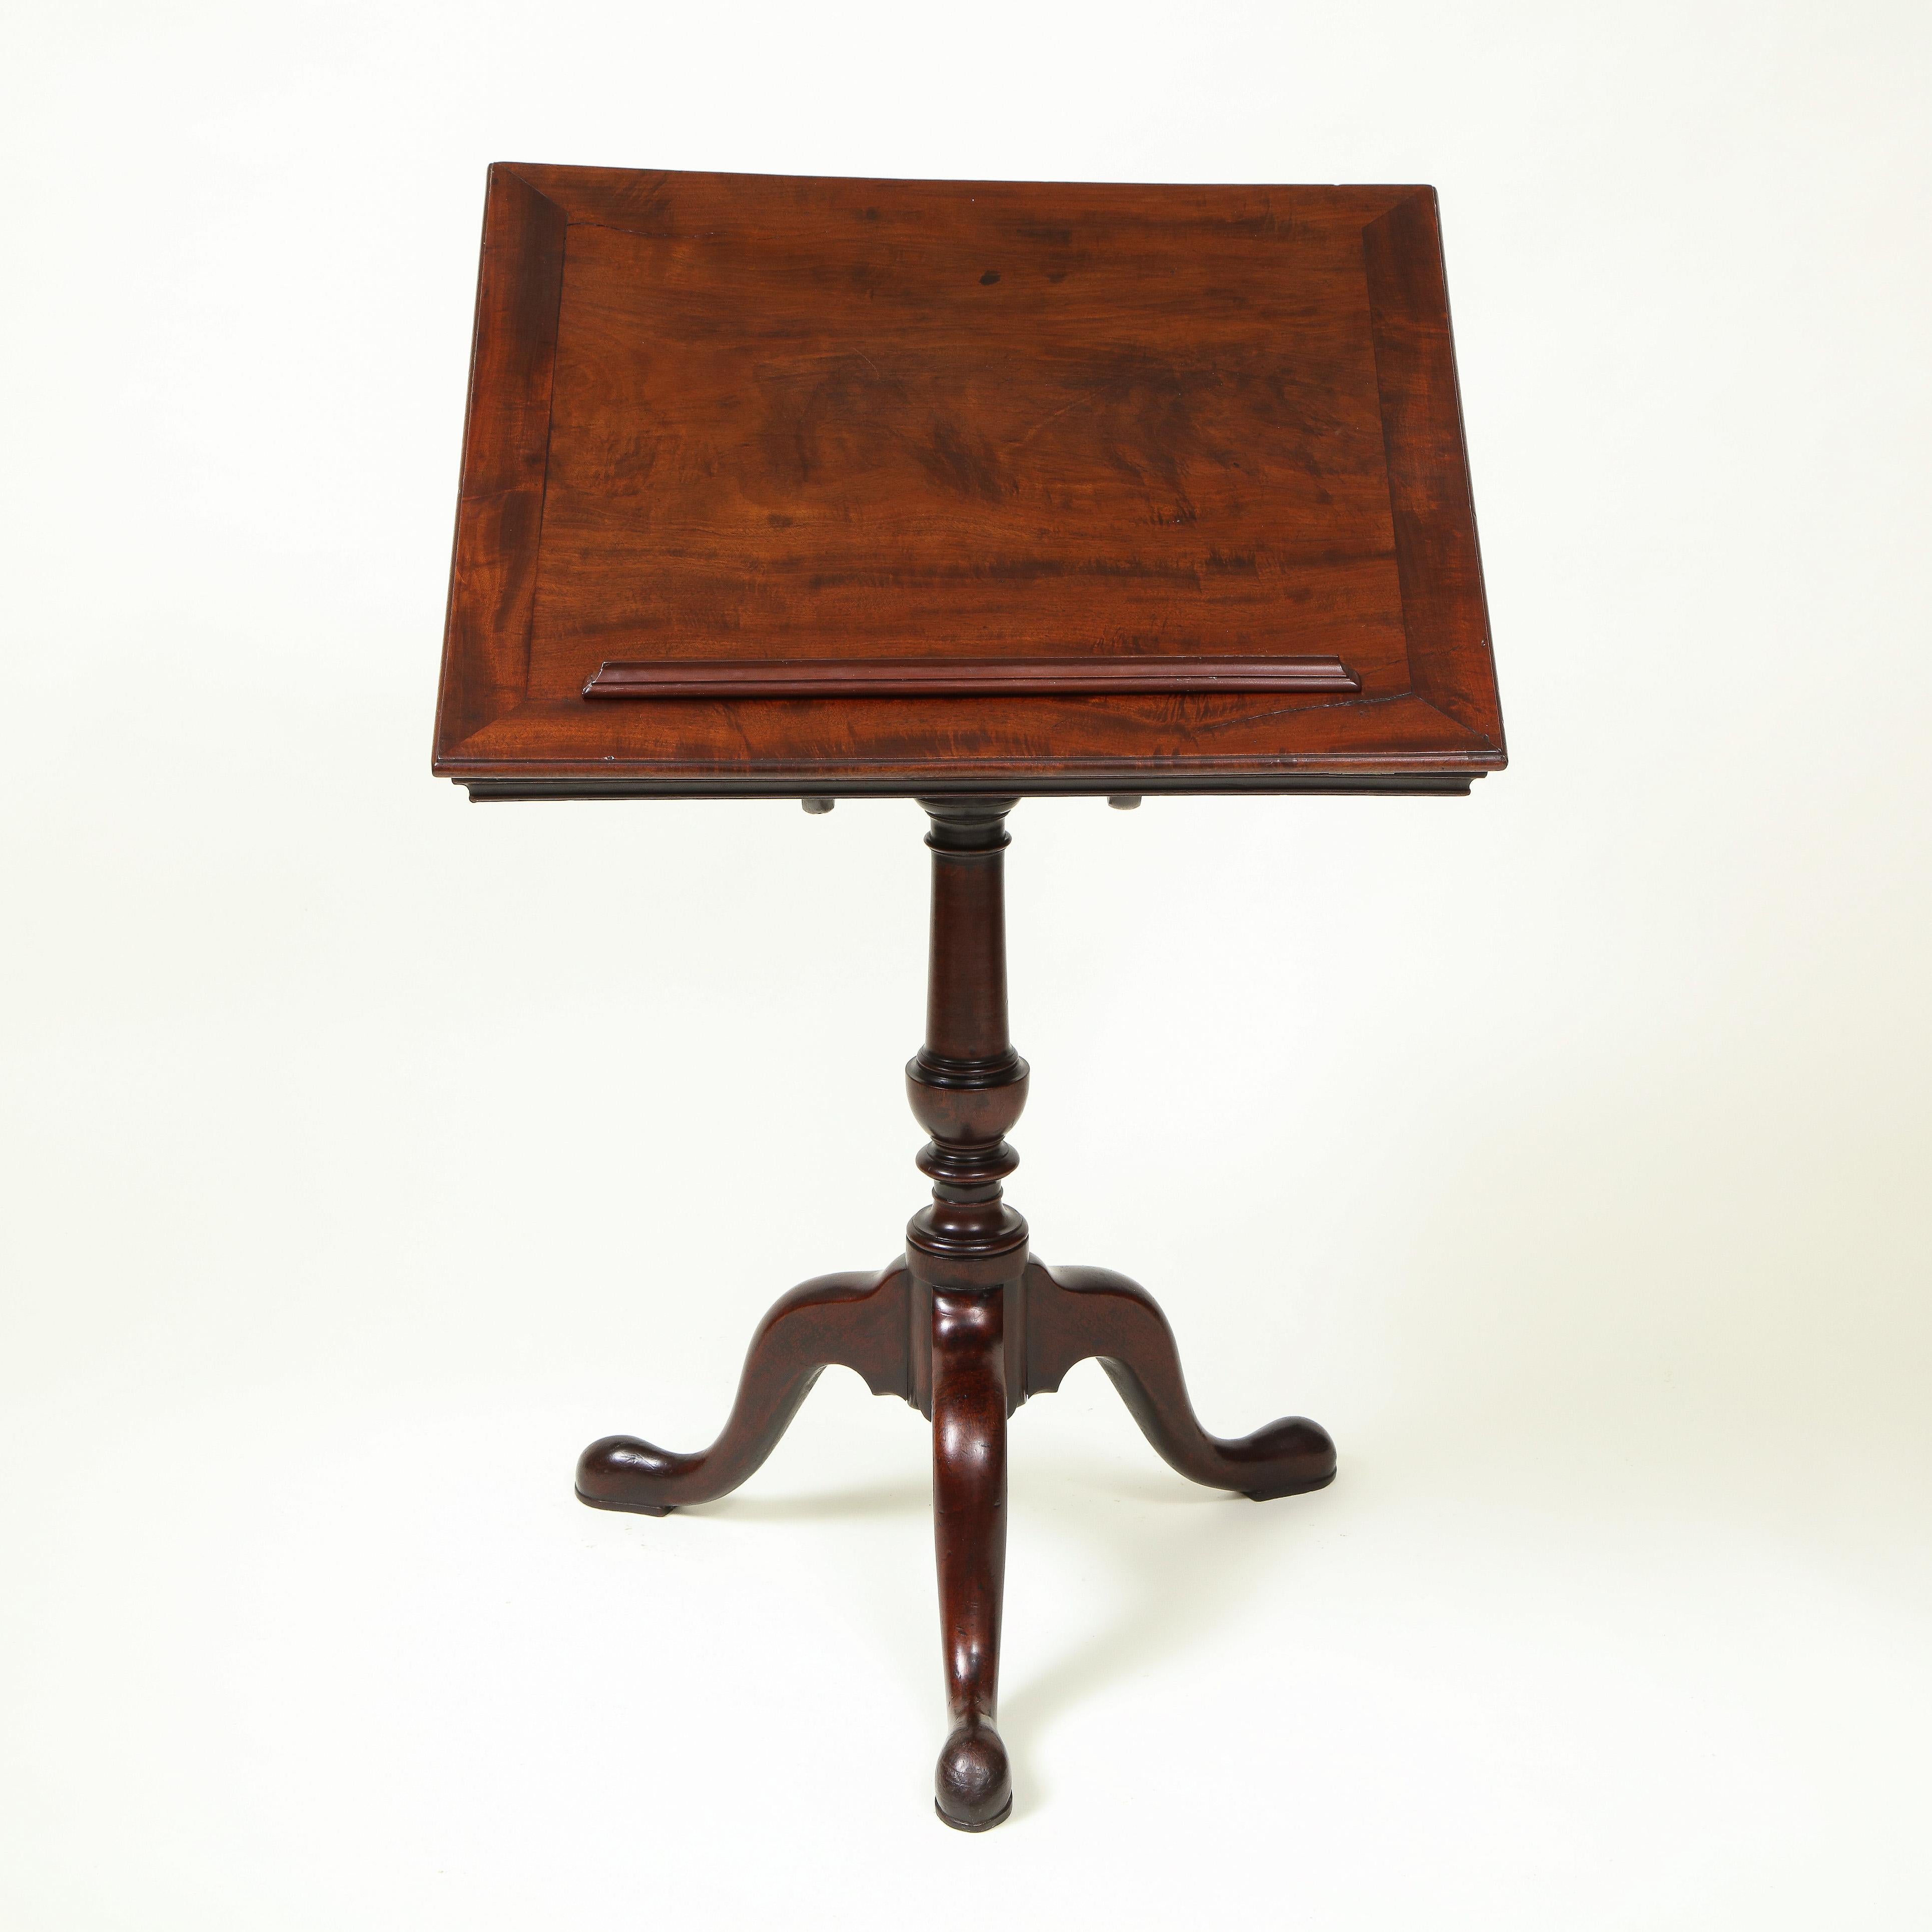 The rectangular tilt-top of finely figured timber with removable reading ledge; raised on a turn columnar support and three downswept cabriole legs terminating in pad-form feet.

Provenance: From the Collection of Mario Buatta, New York, NY.